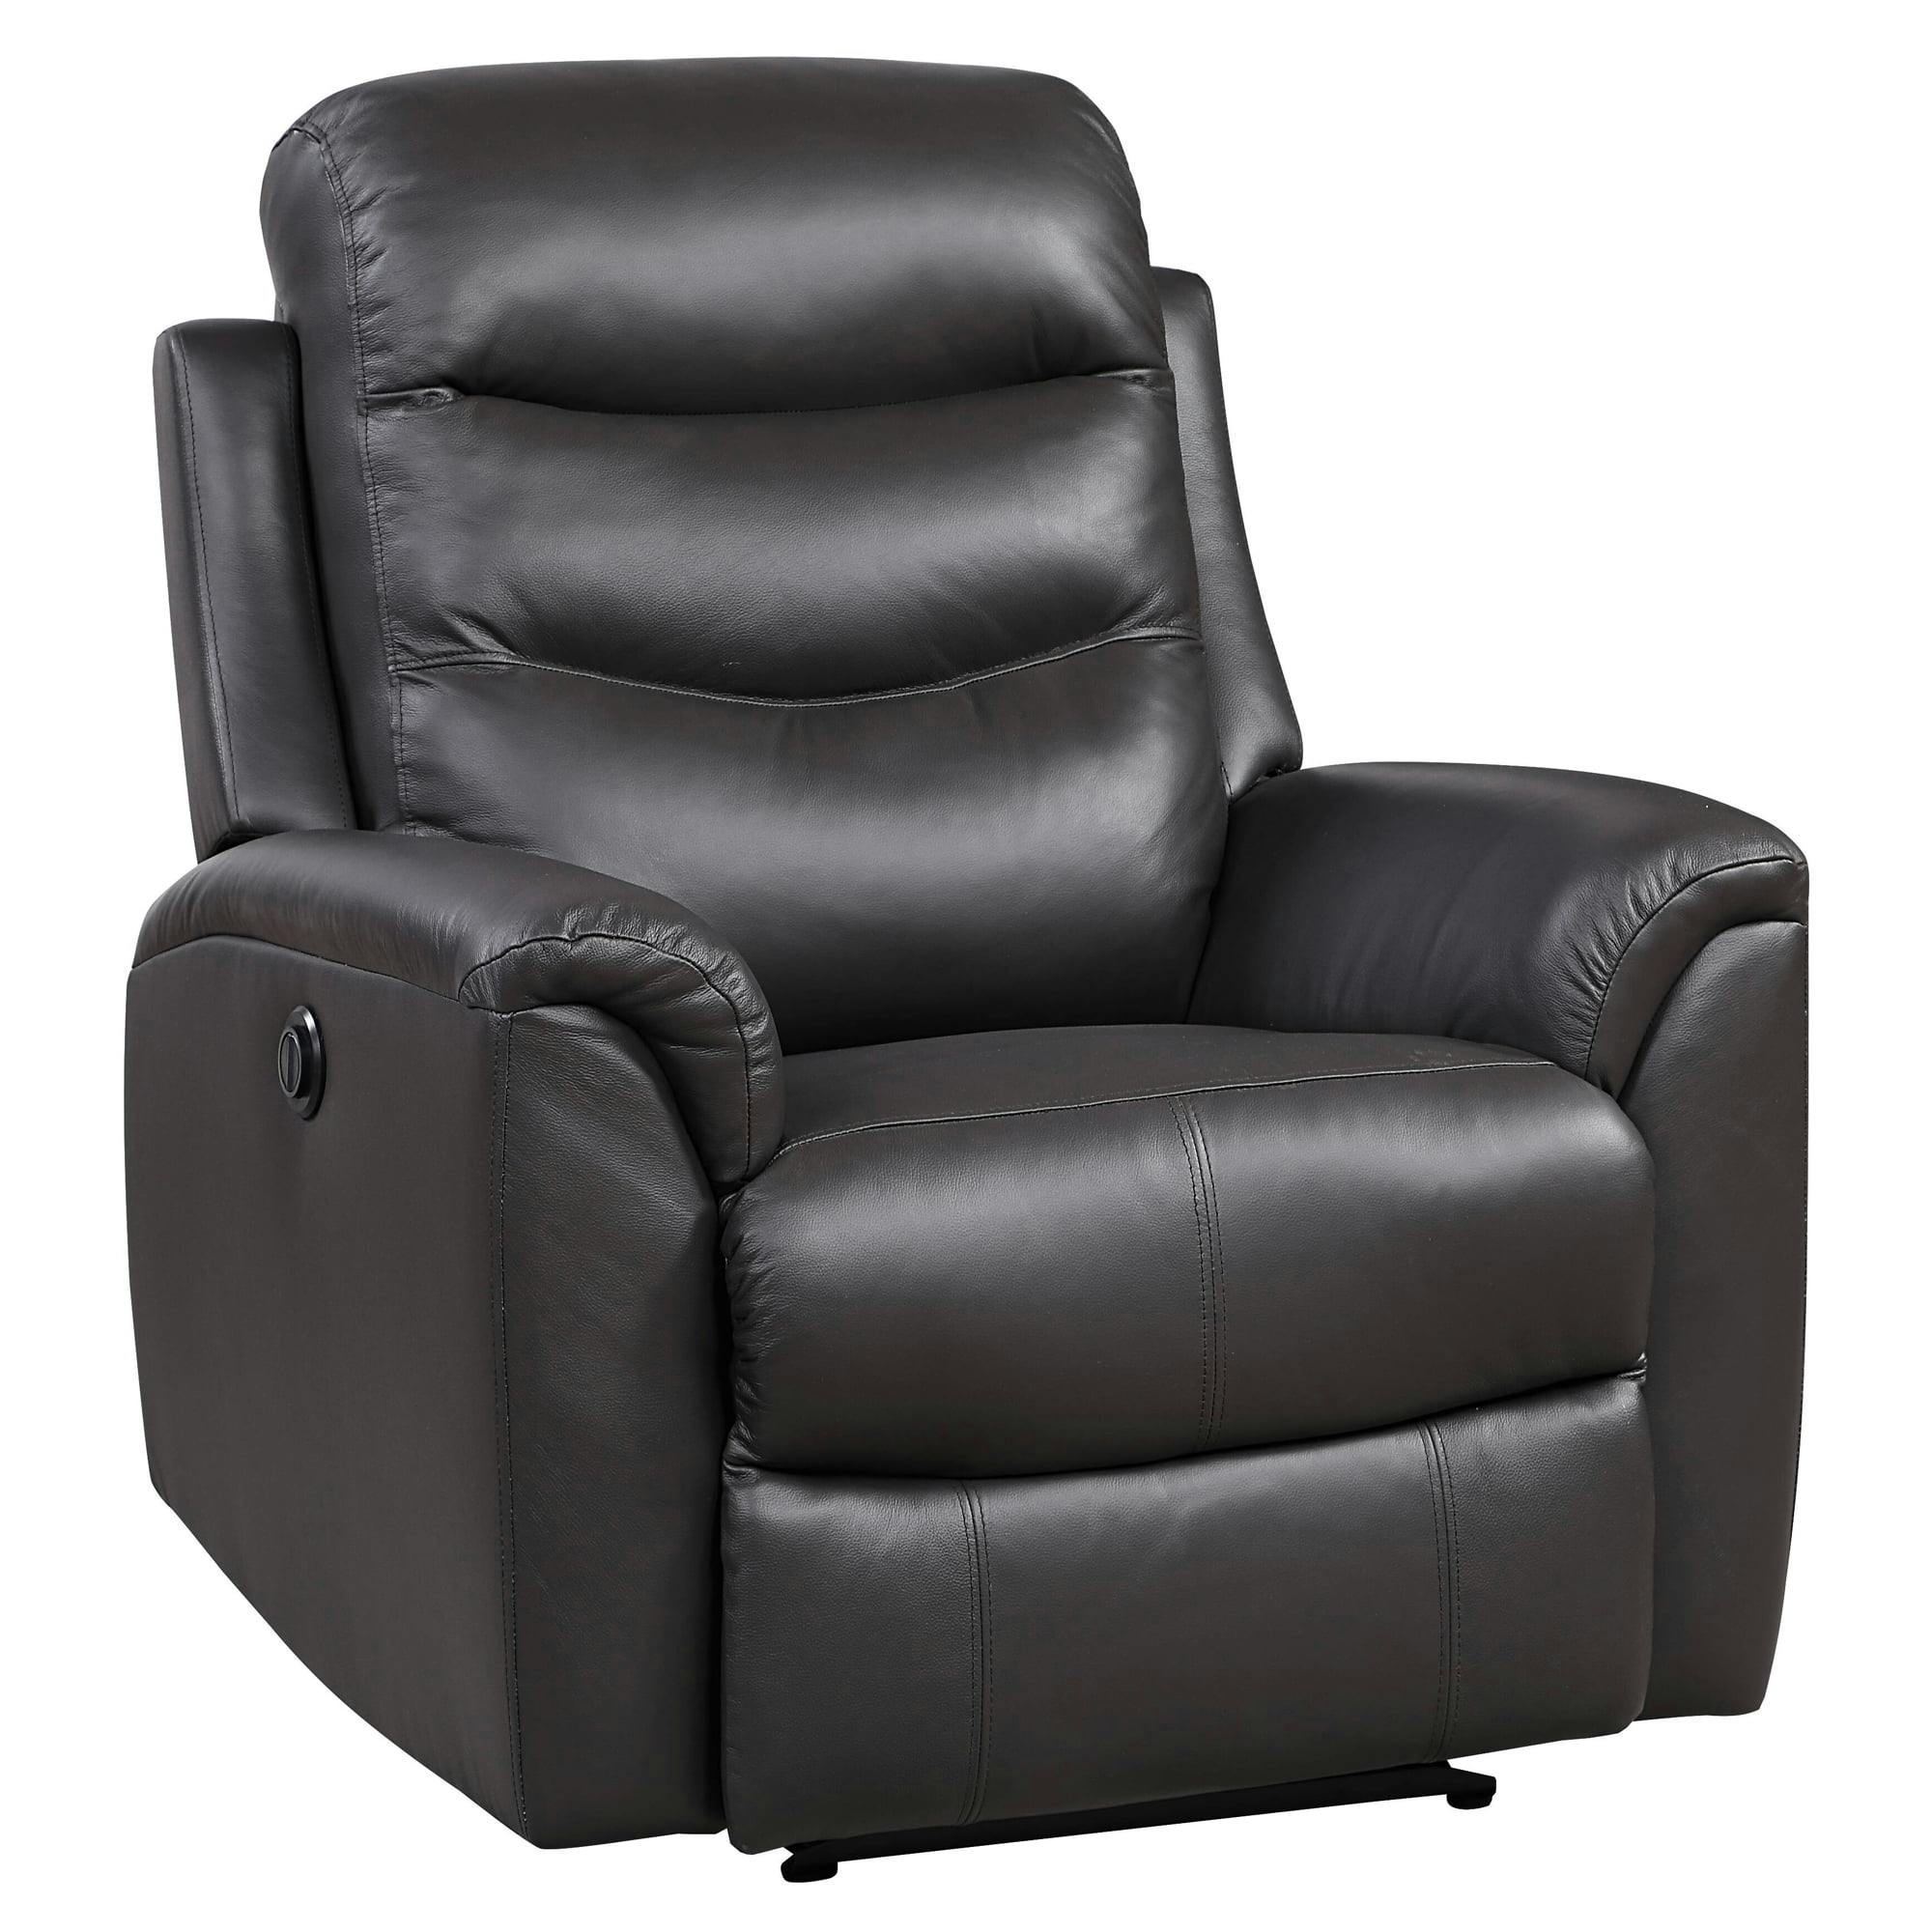 Ava Transitional Brown Leather Recliner with Pillow Top Armrests